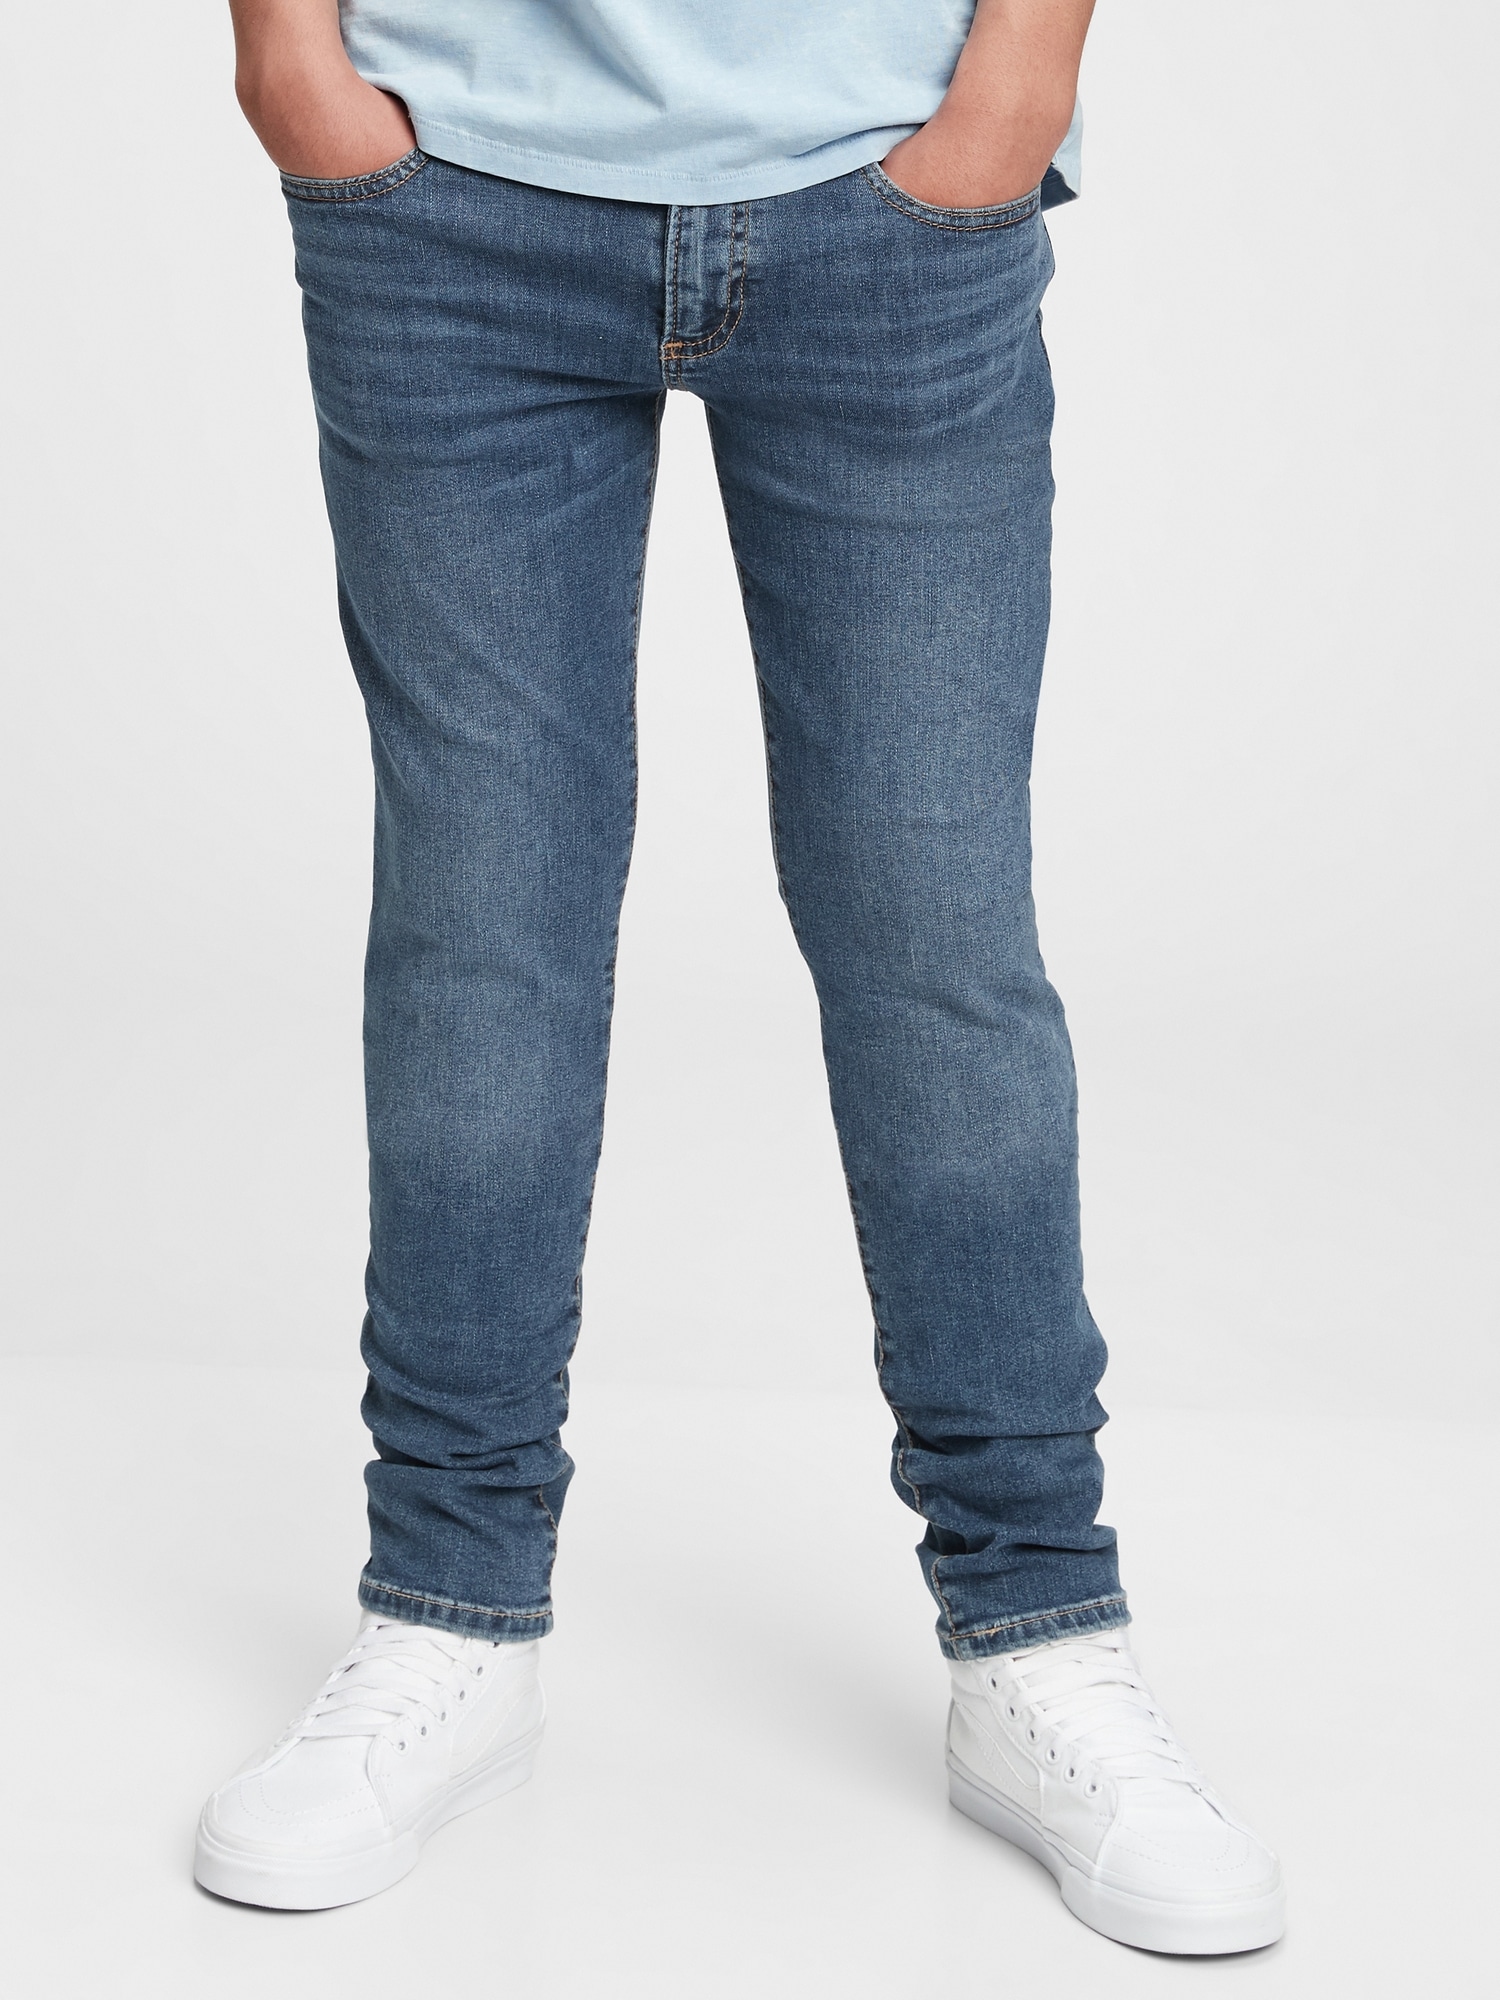 Teen Stacked Ankle Skinny Jeans with Washwell™ | Gap